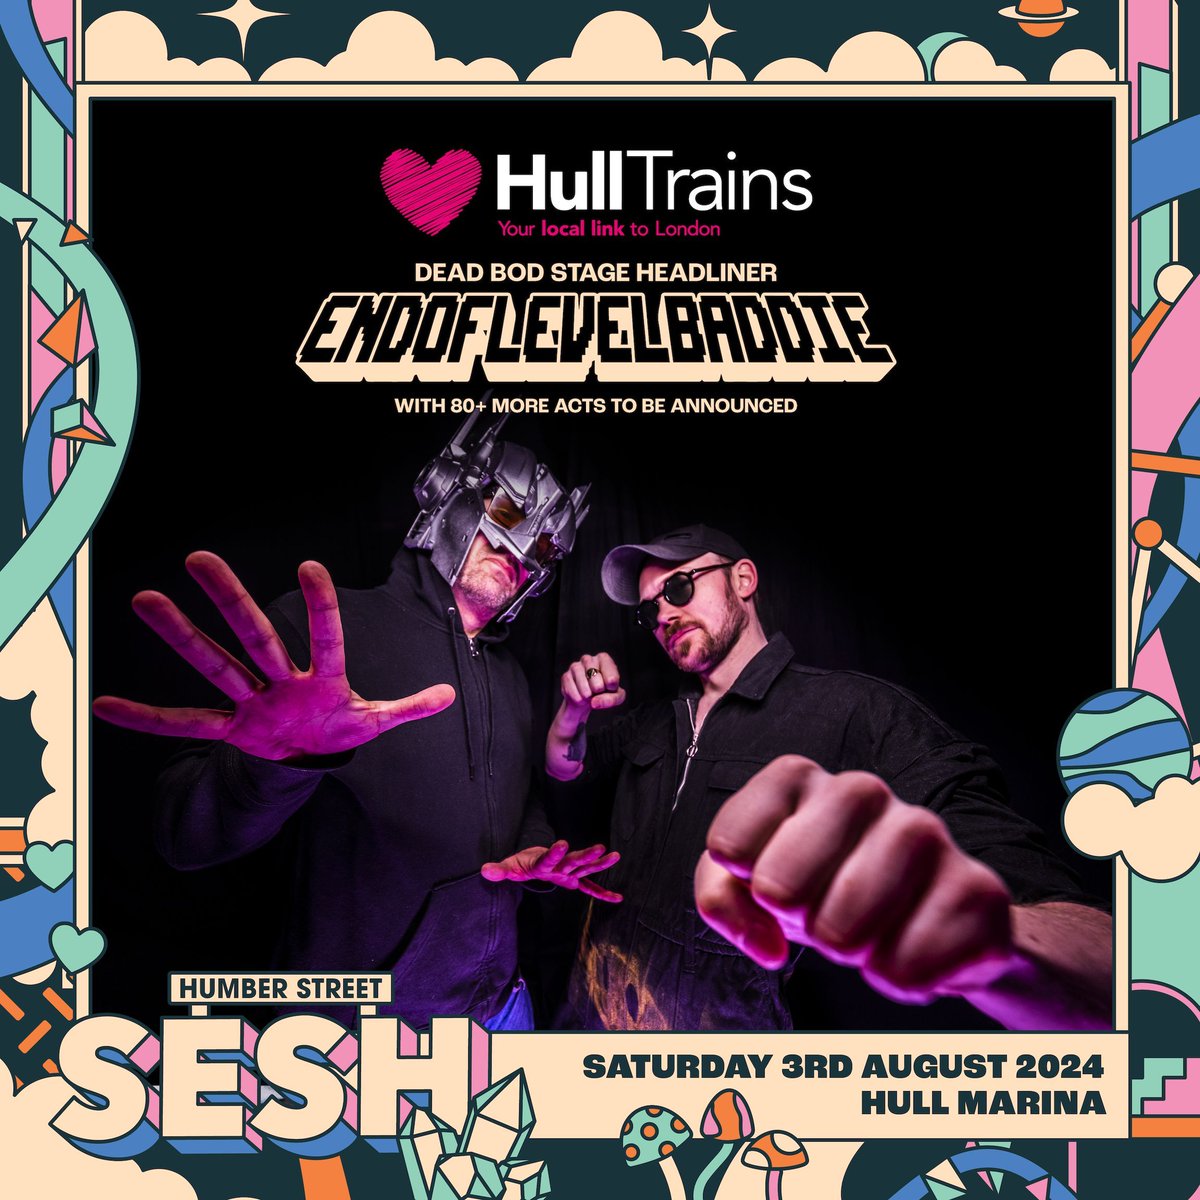 2024 DEAD BOD STAGE HEADLINER @therealbaddie Packing legendary beats, a staple on the local scene and beyond for 20 years, with a reputation for bringing a party vibe and relentless headline energy to any event 🎟 humberstreetsesh.co.uk 🚂 thanks to stage sponsor @Hull_Trains